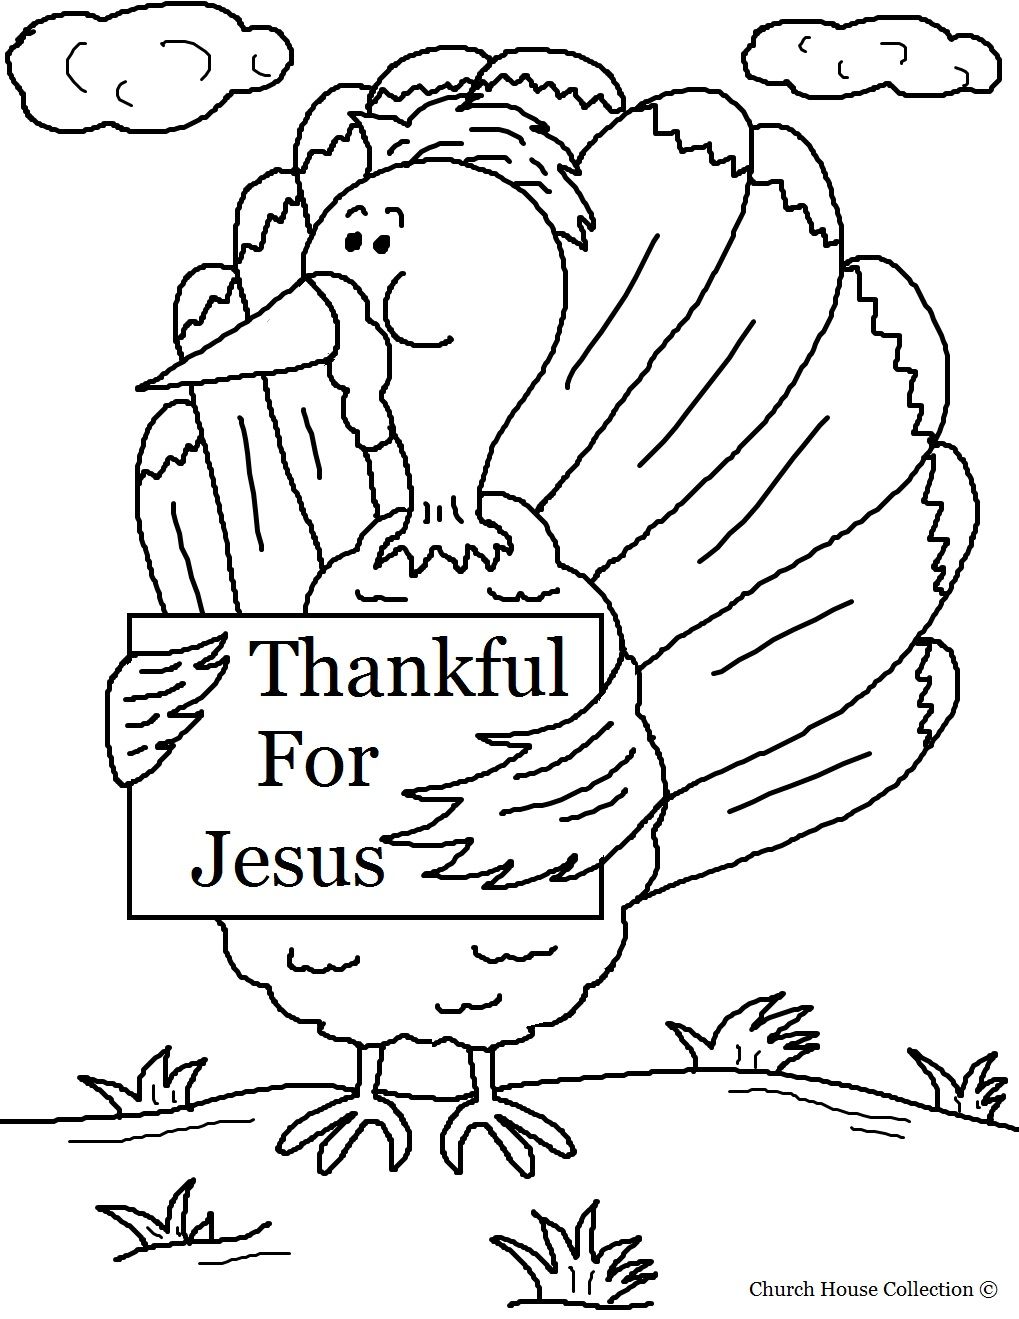 christian thanksgiving coloring pages